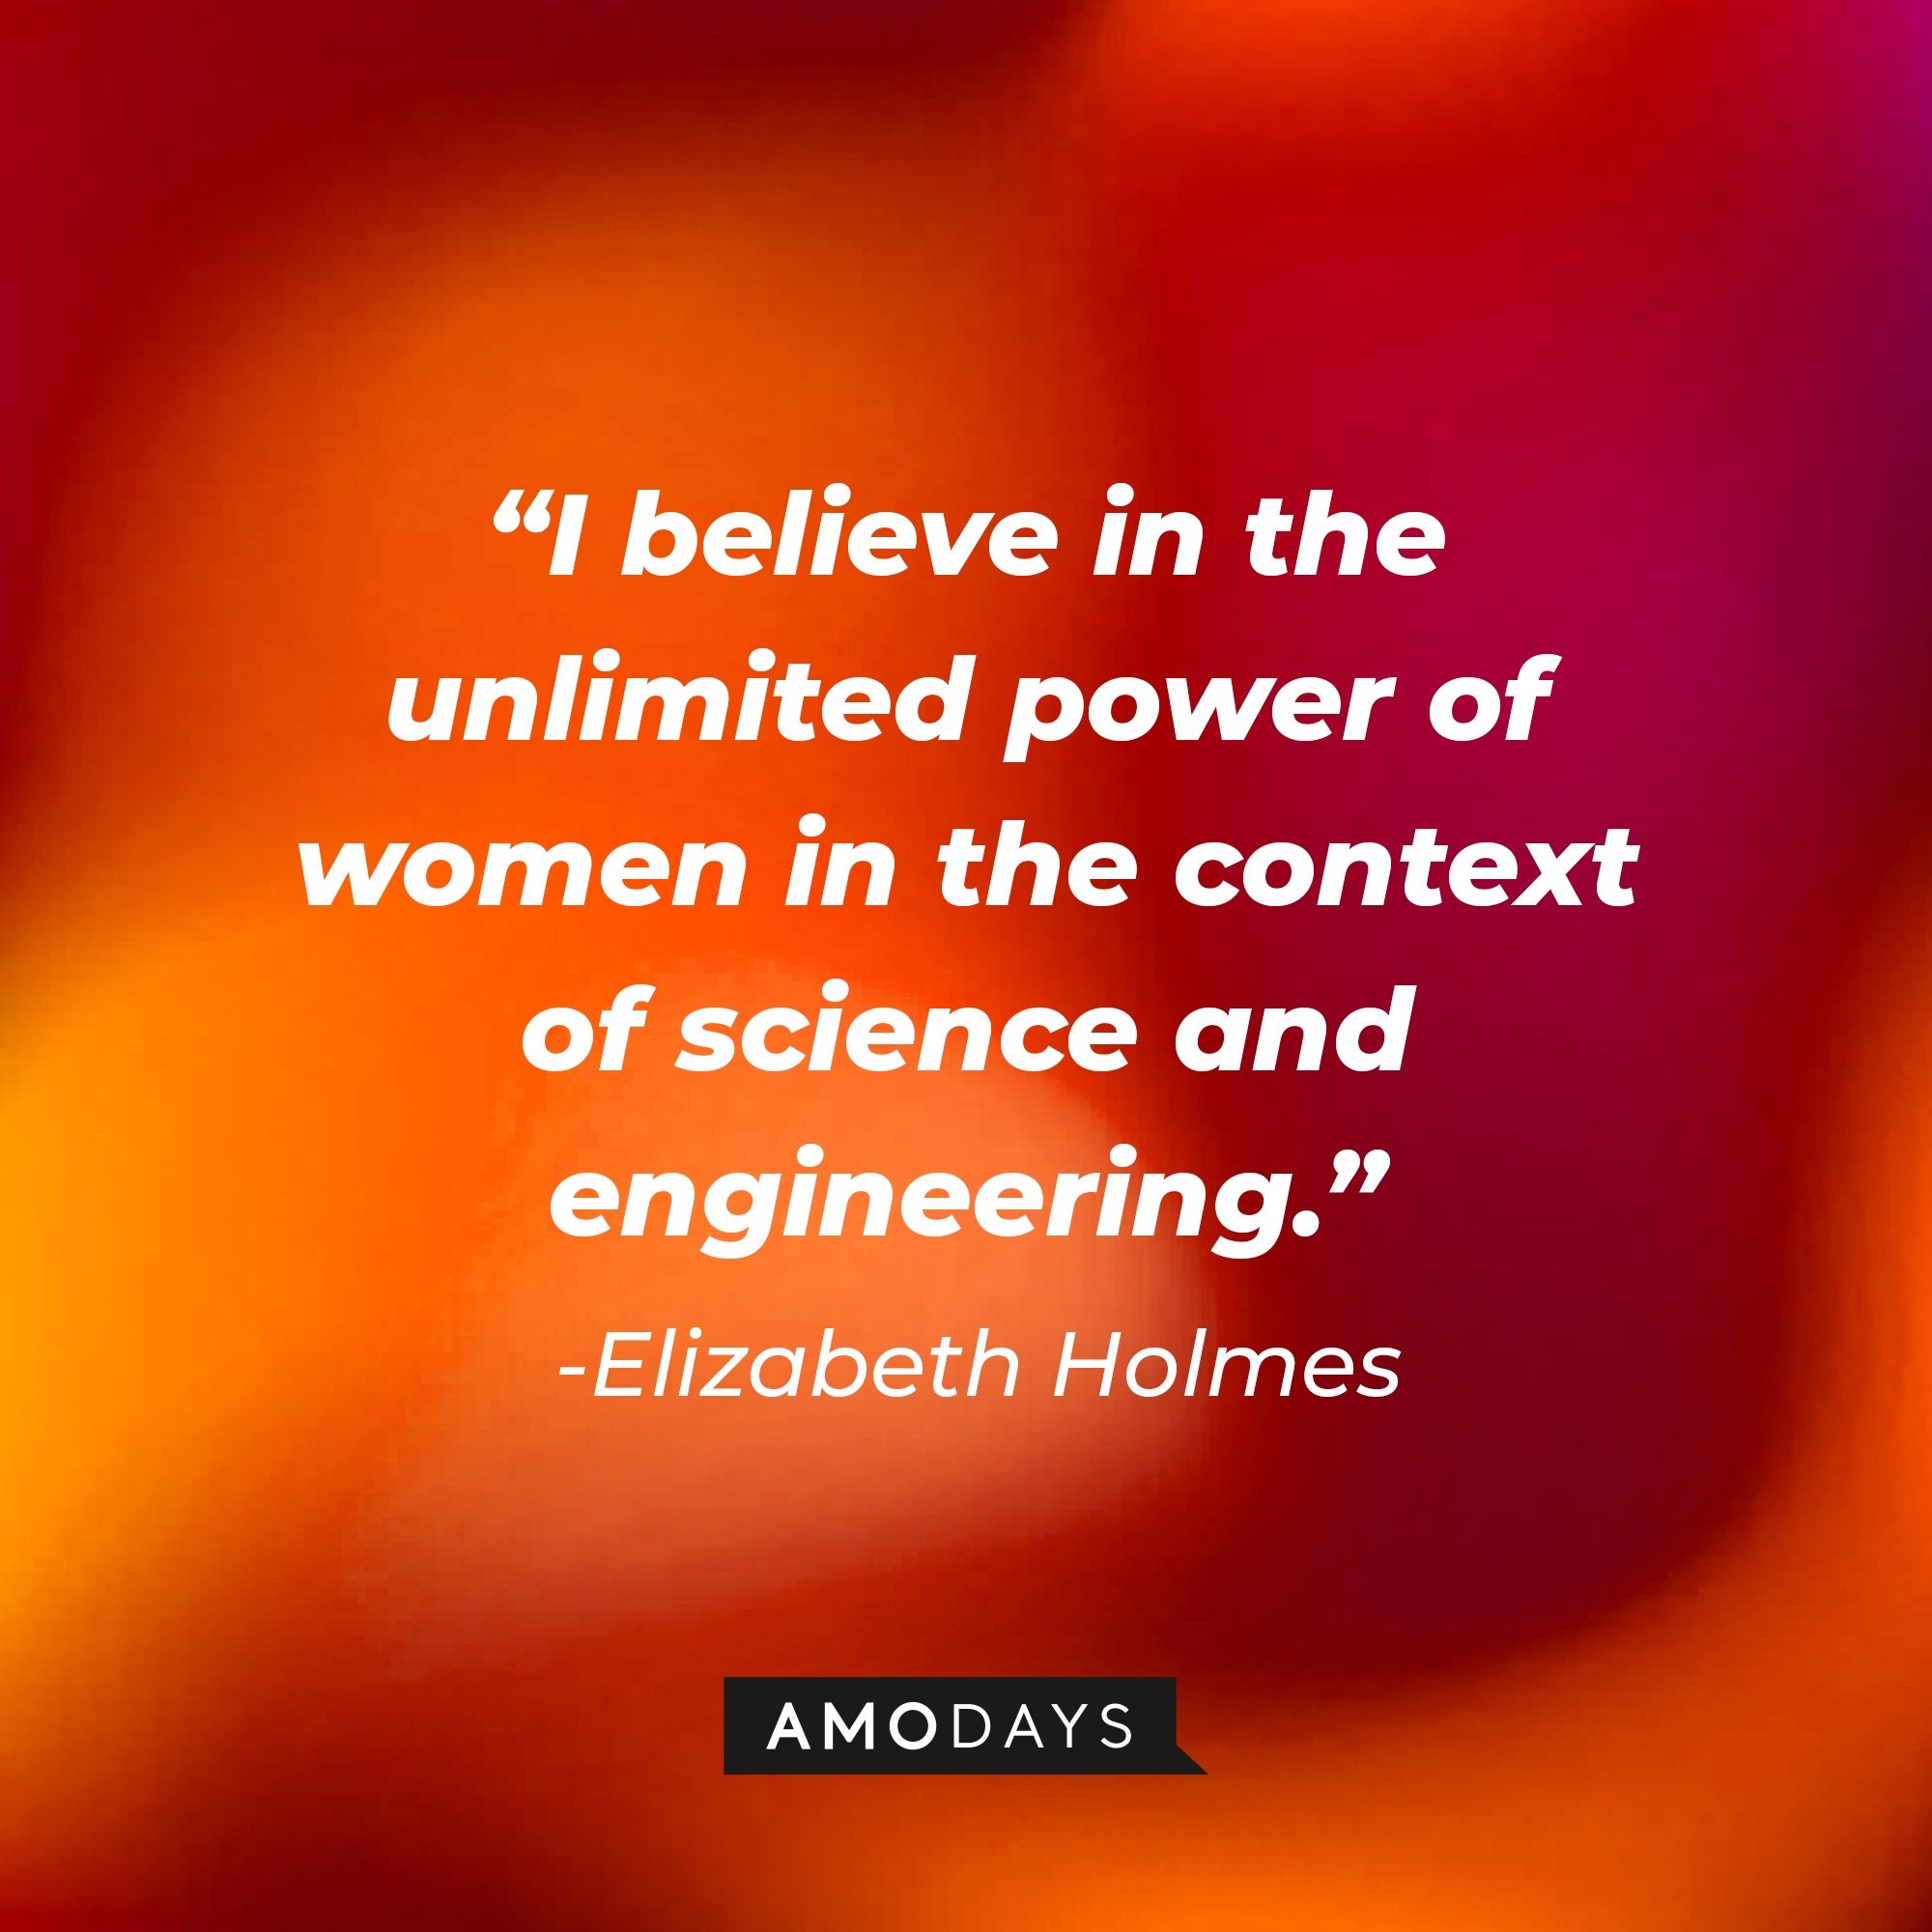 Elizabeth Holmes' quote: "I believe in the unlimited power of women in the context of science and engineering." | Source: Amodays